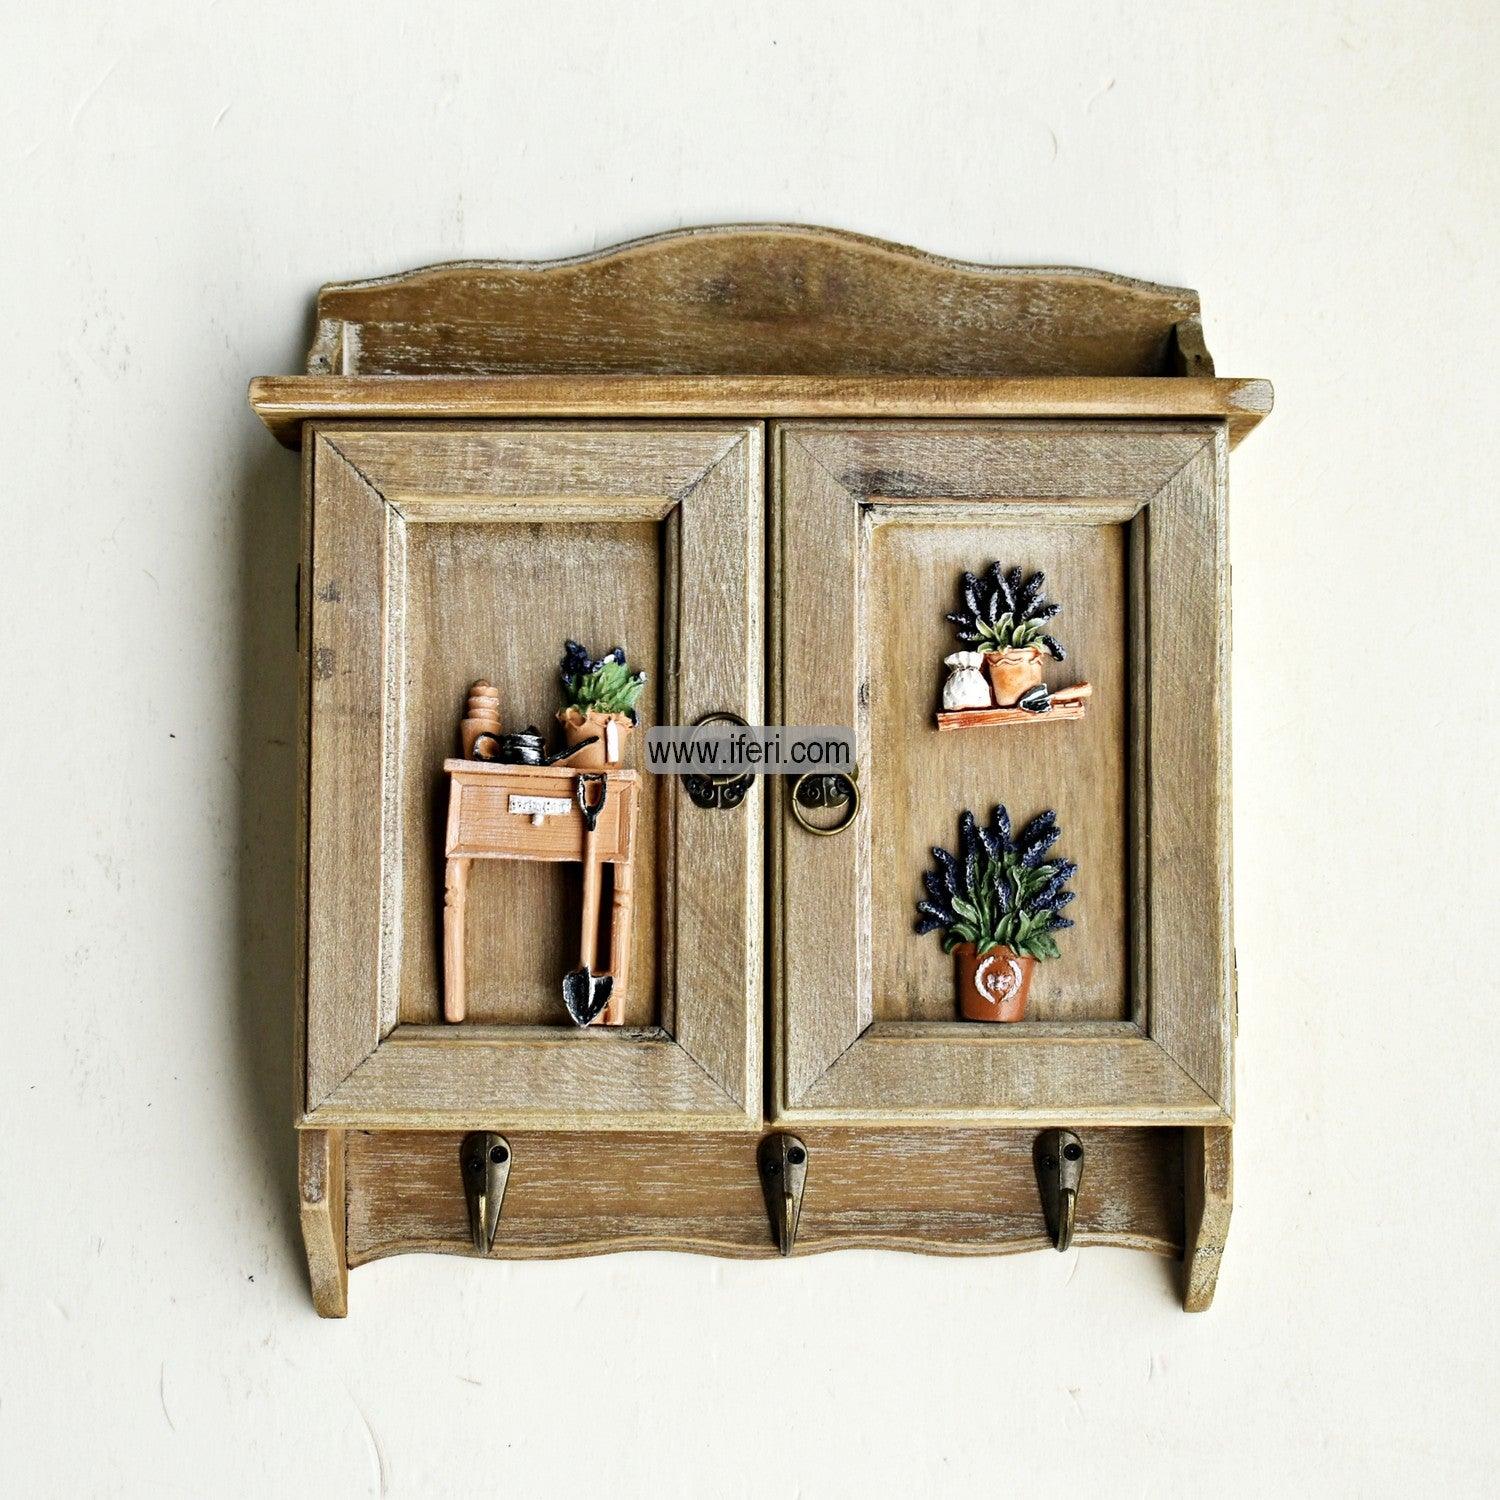 12 Inch Wooden Wall Hanging Key Holder Box